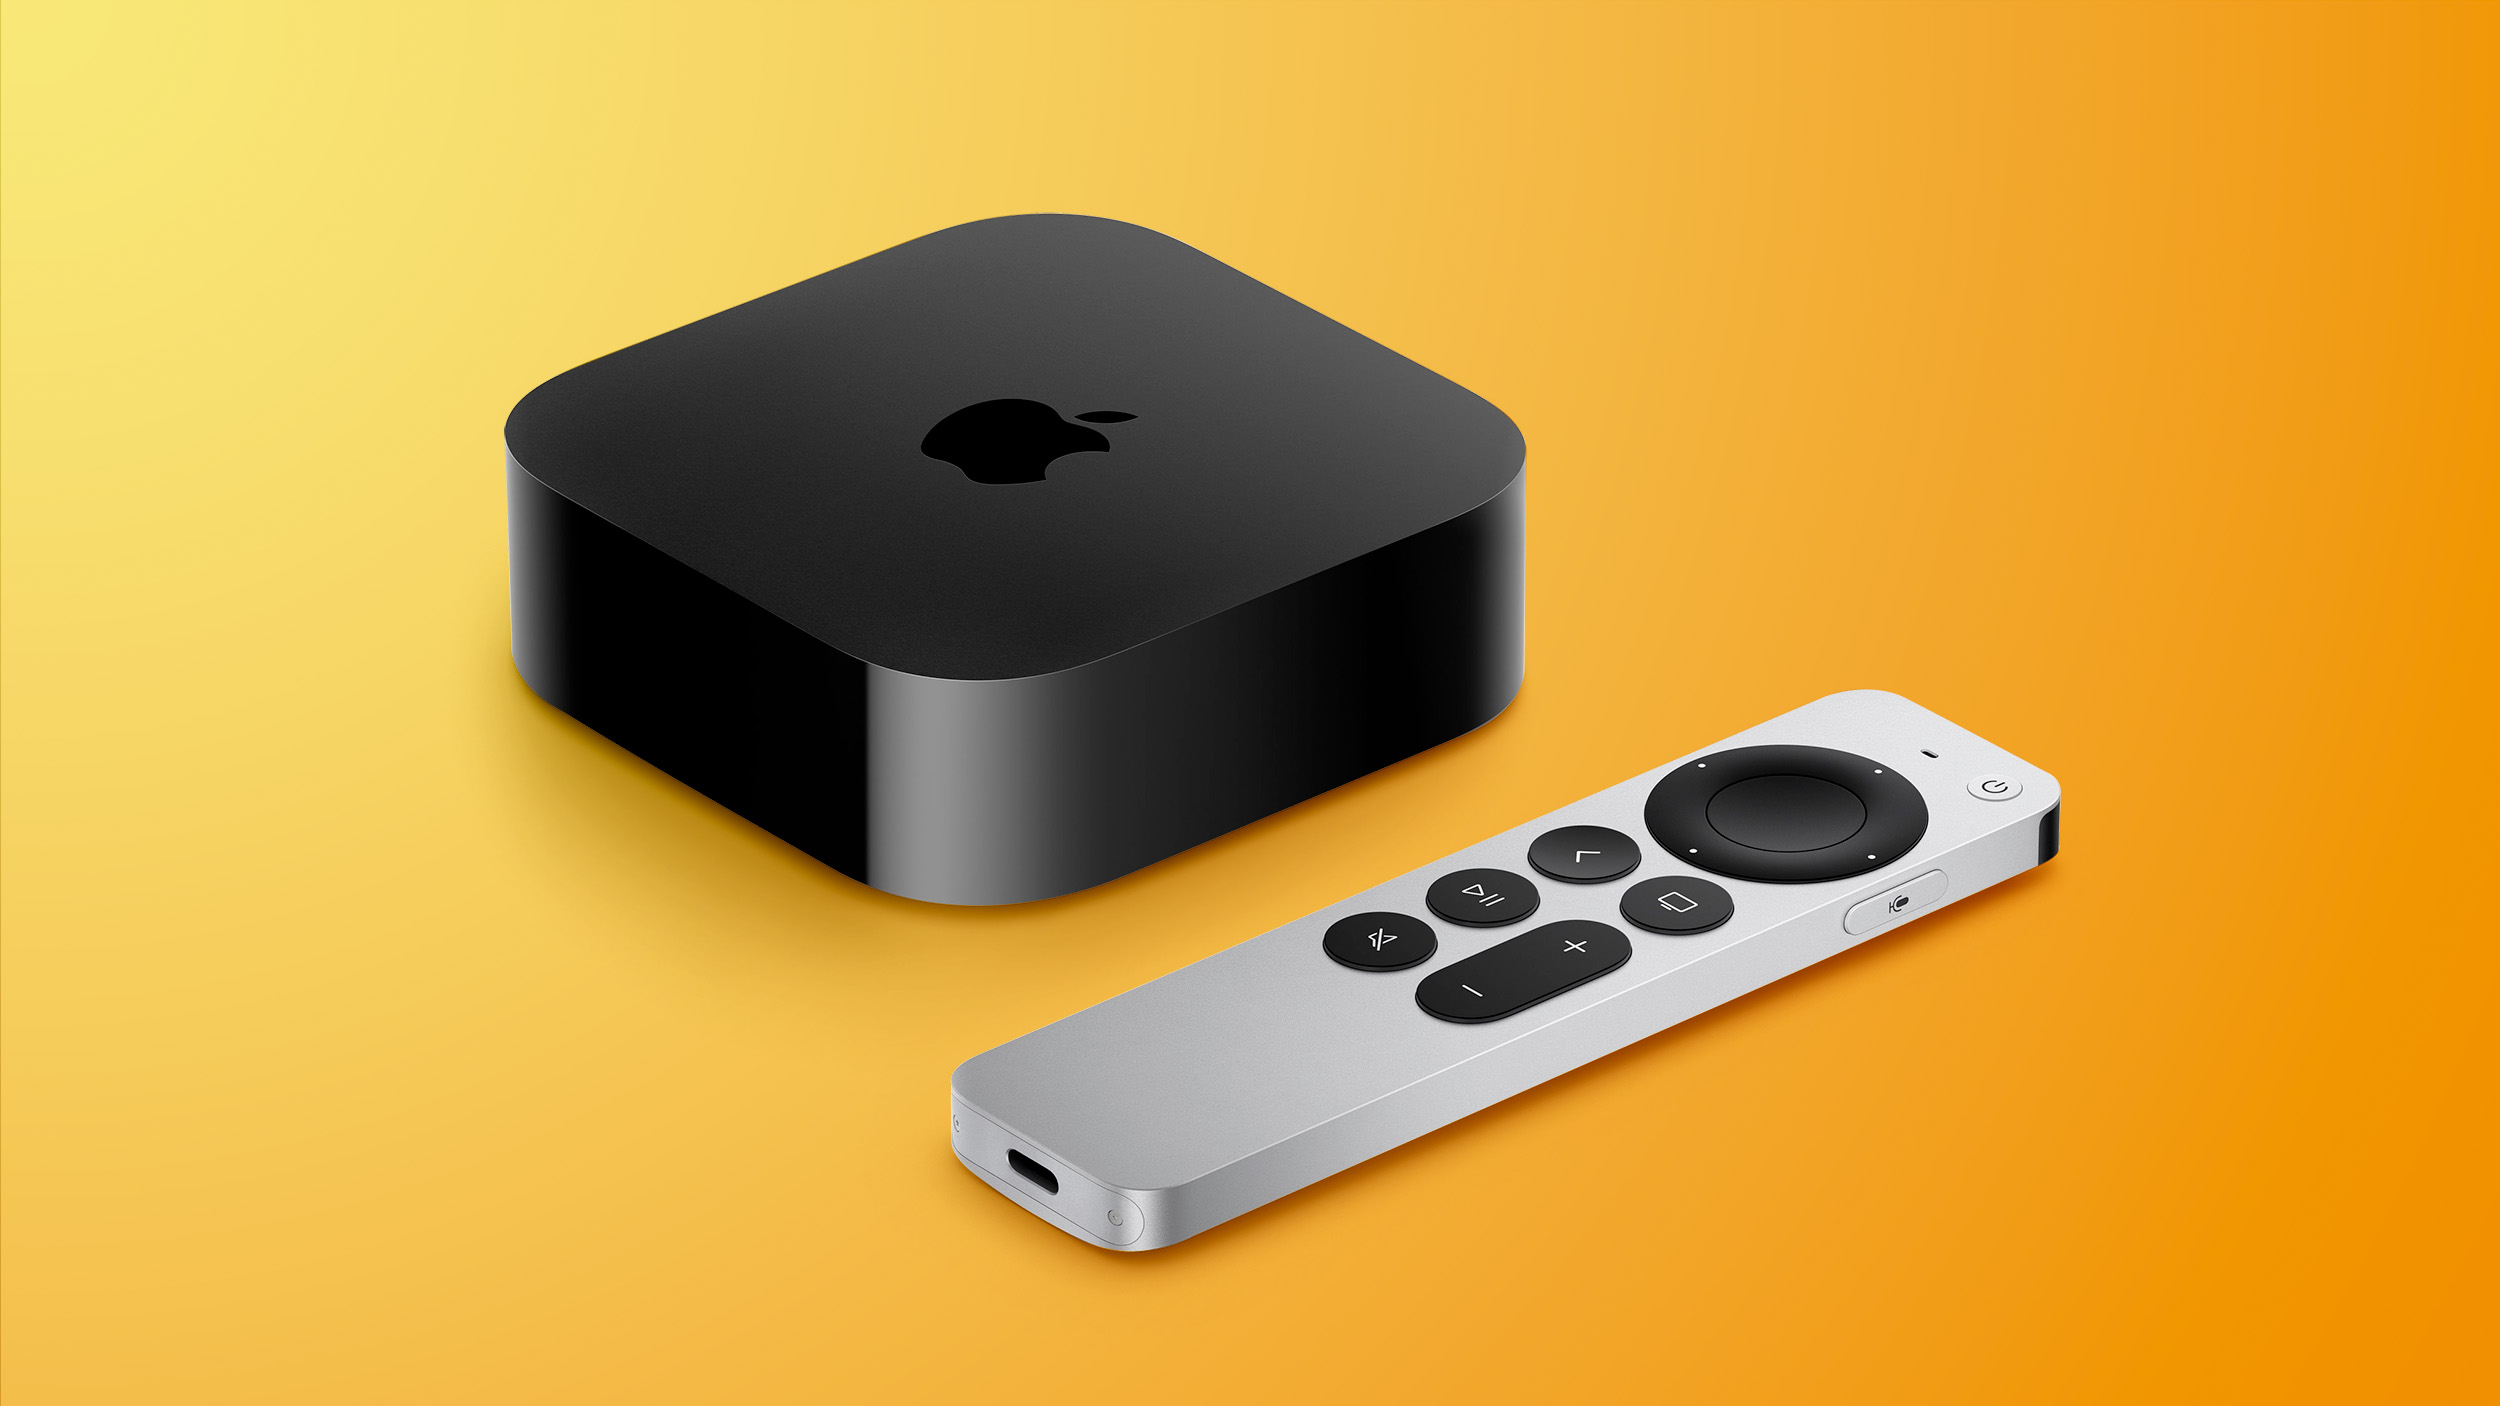 Apple TV 4K 2022 Reviews: Faster and More Affordable With HDR10+ Support and USB-C Remote, But Largely Unchanged